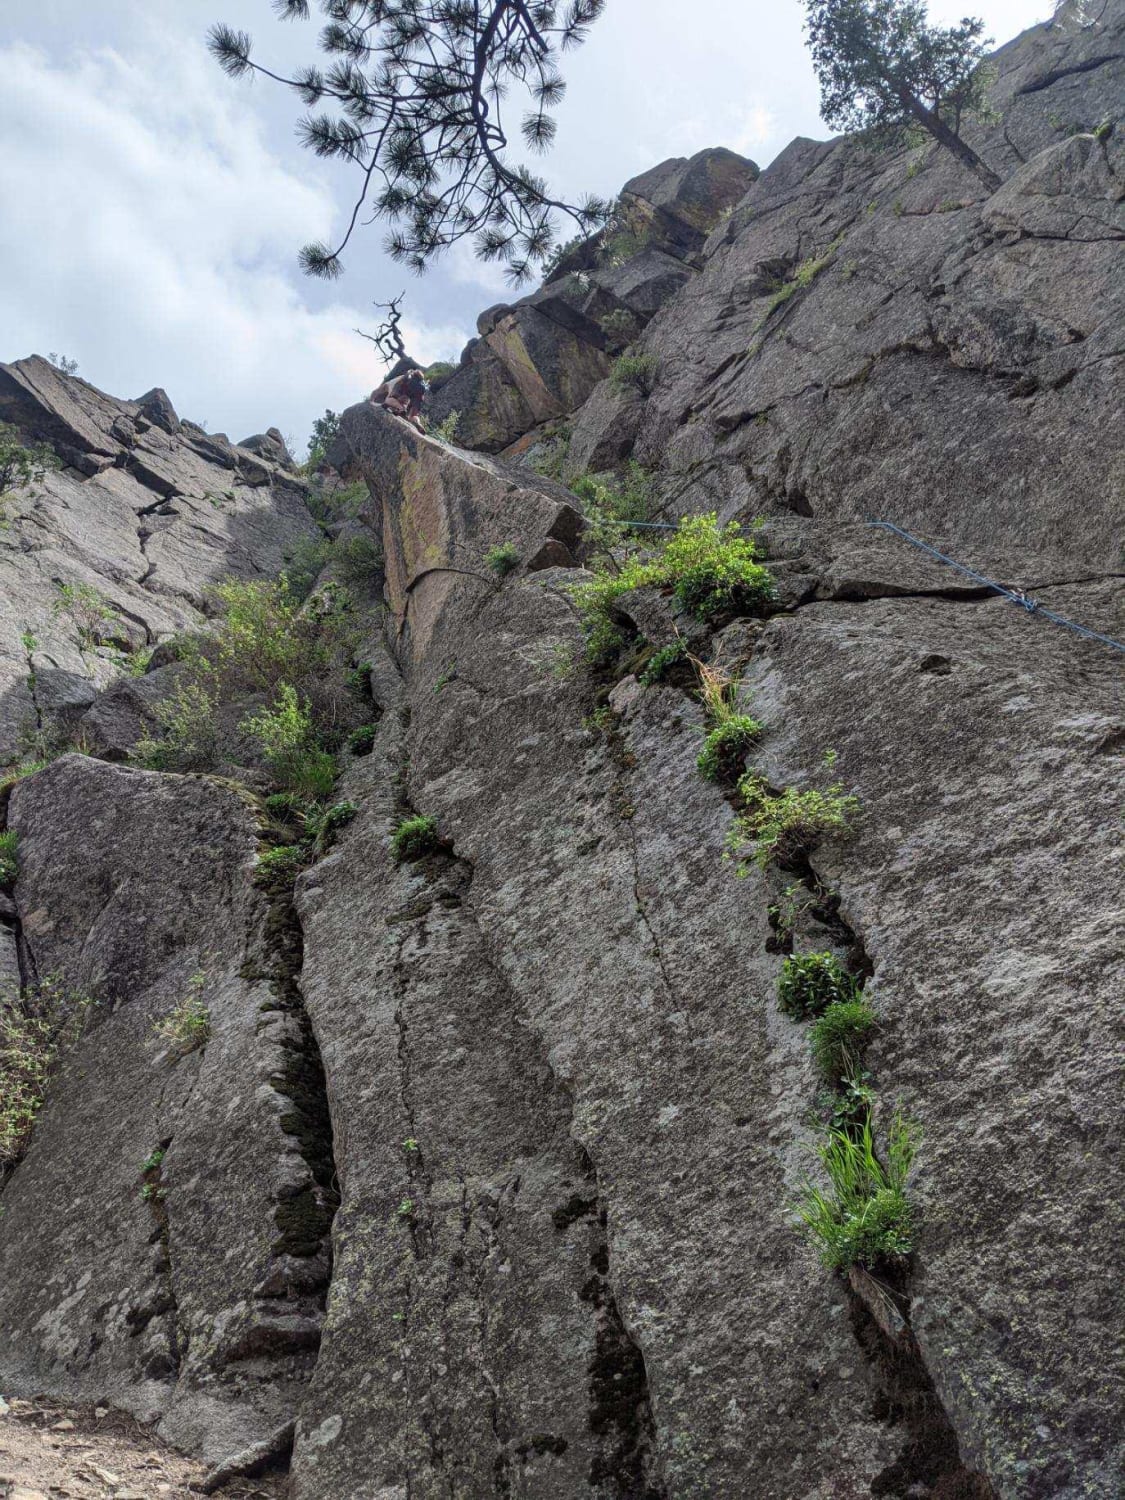 Cake day post- onsighted this beautiful mixed 5.10c route- see if you can spot me near the top!